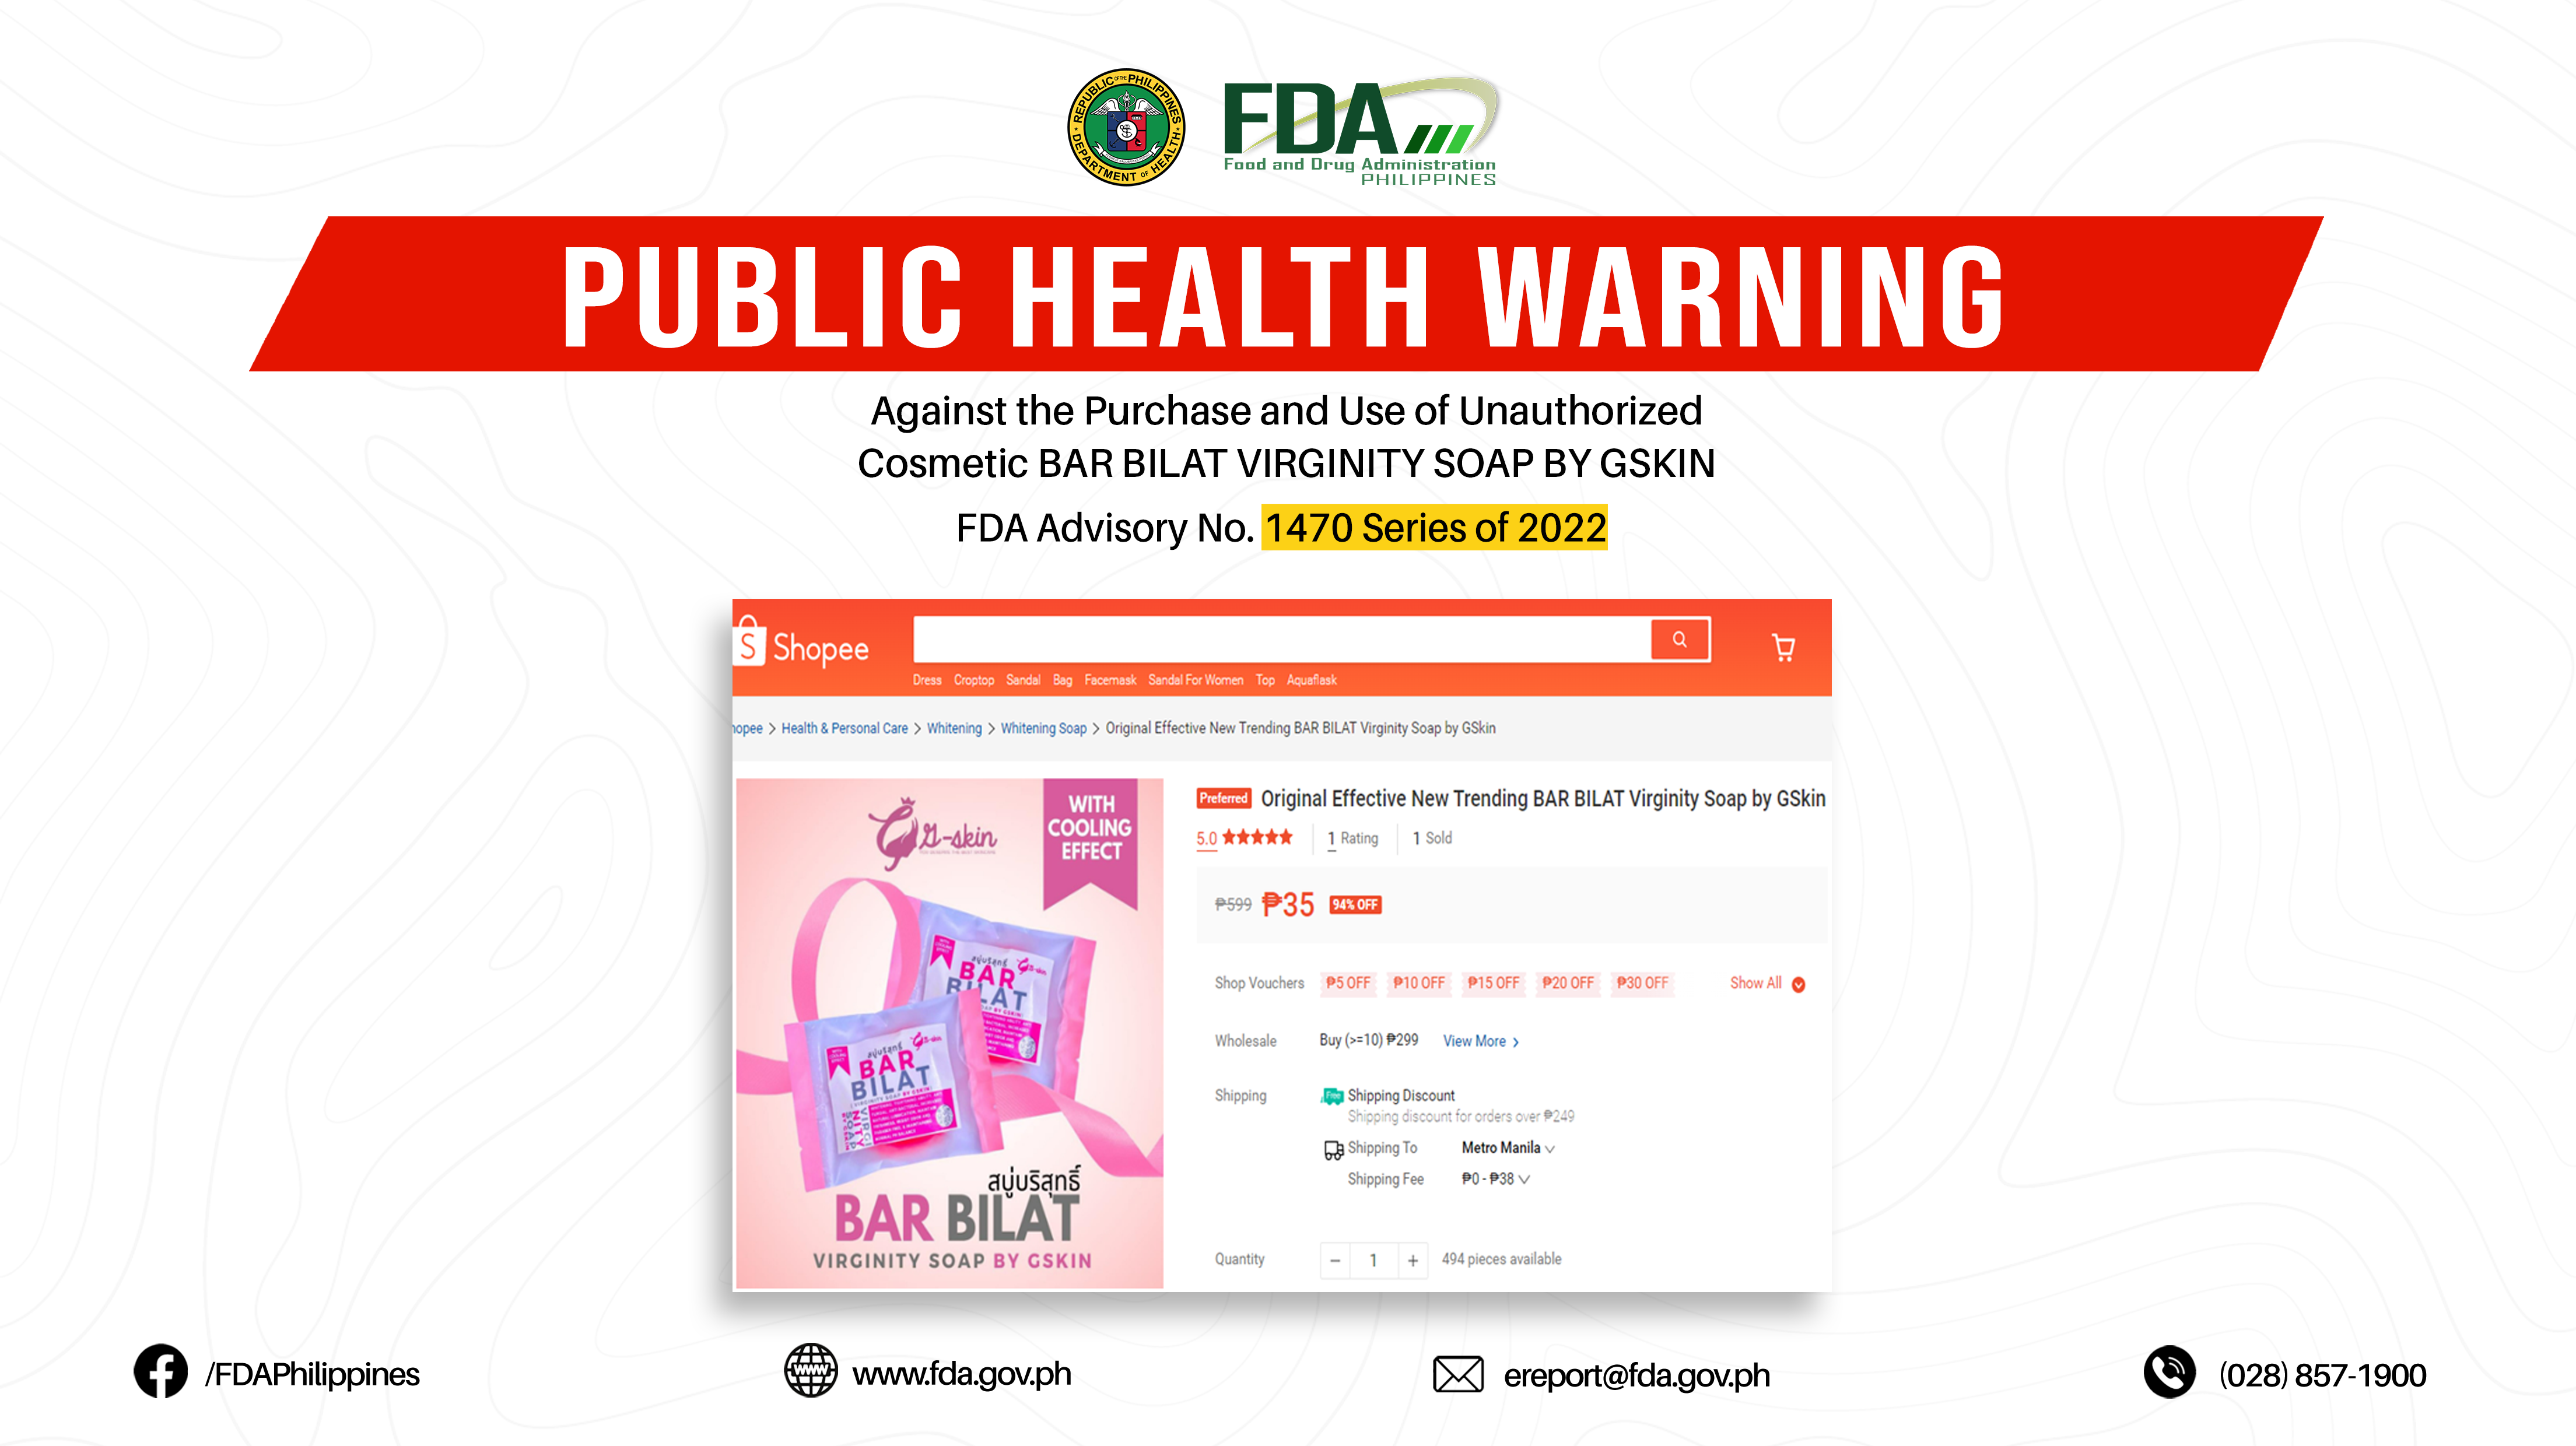 FDA Advisory No.2022-1470 || Public Health Warning Against the Purchase and Use of Unauthorized Cosmetic BAR BILAT VIRGINITY SOAP BY GSKIN